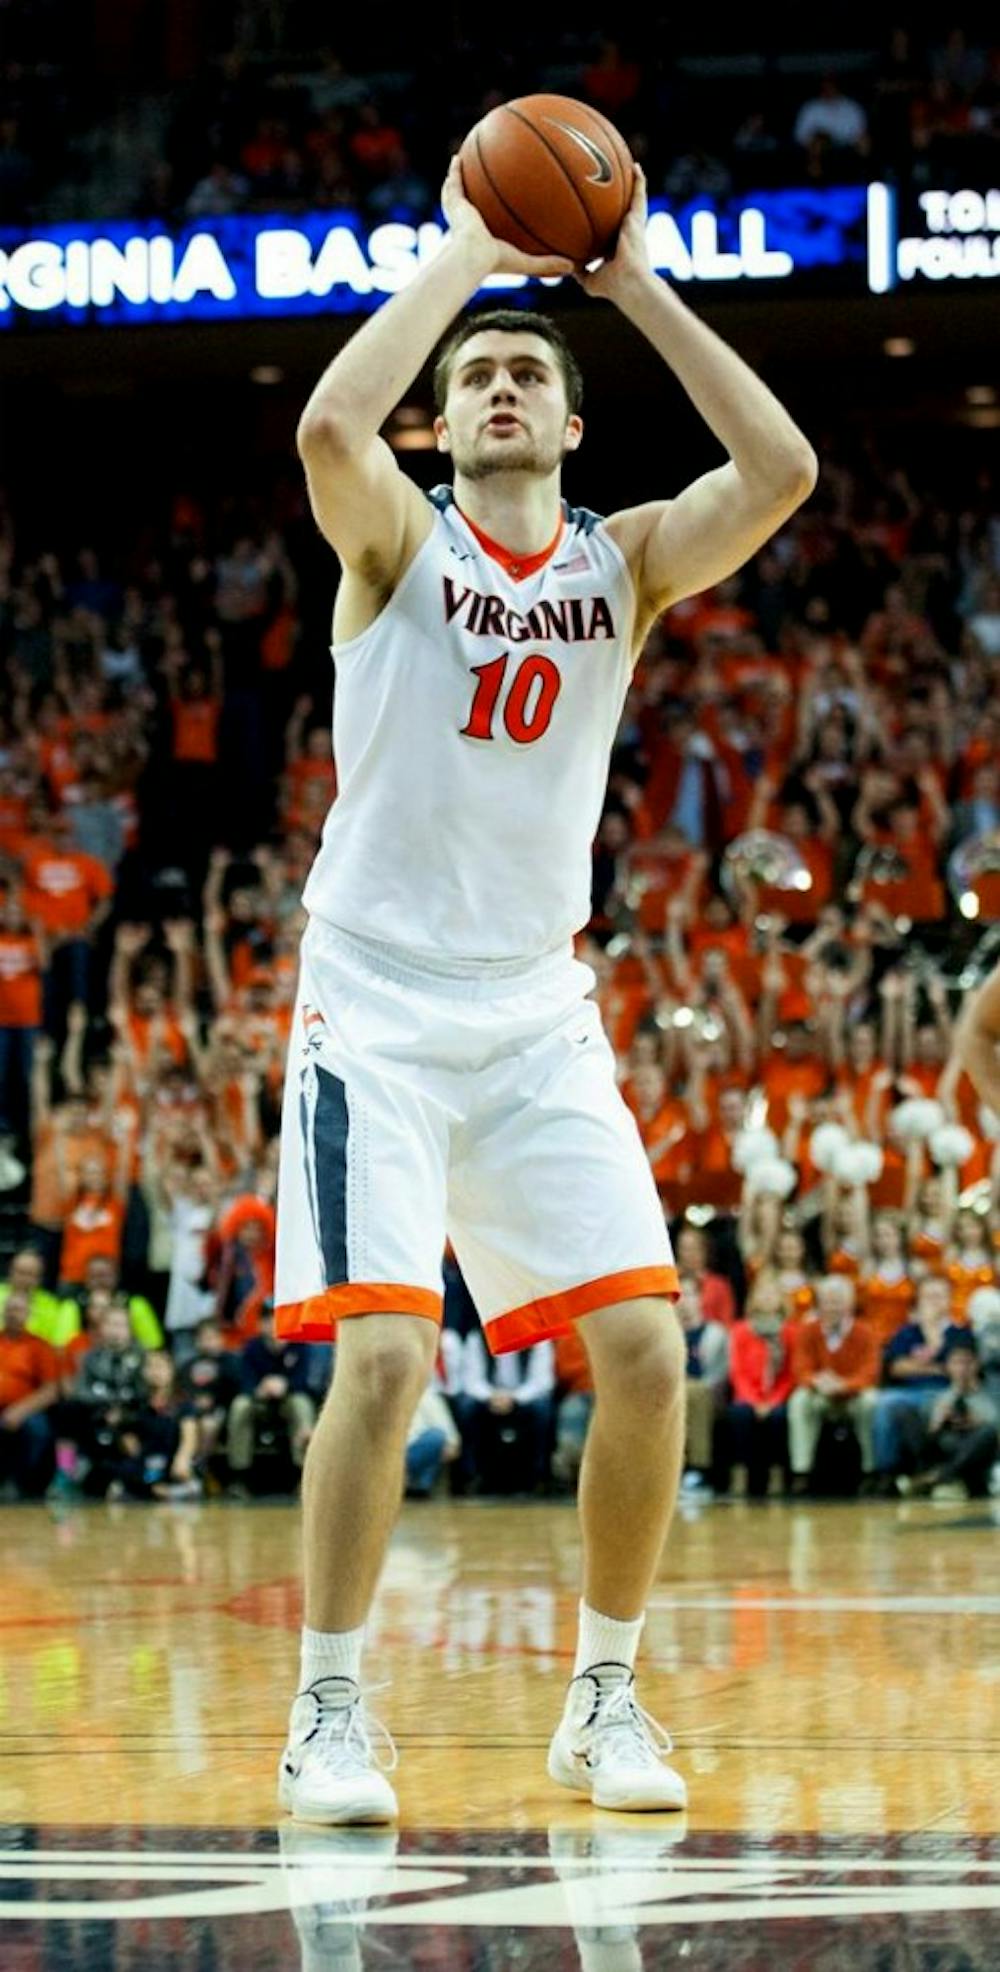 Center Mike Tobey scored 15 points and grabbed a career-high 20 rebounds on Senior Night against Louisville. Virginia's fortunes in the ACC Tournament may hinge on the inconsistent senior from Monroe, N.Y.